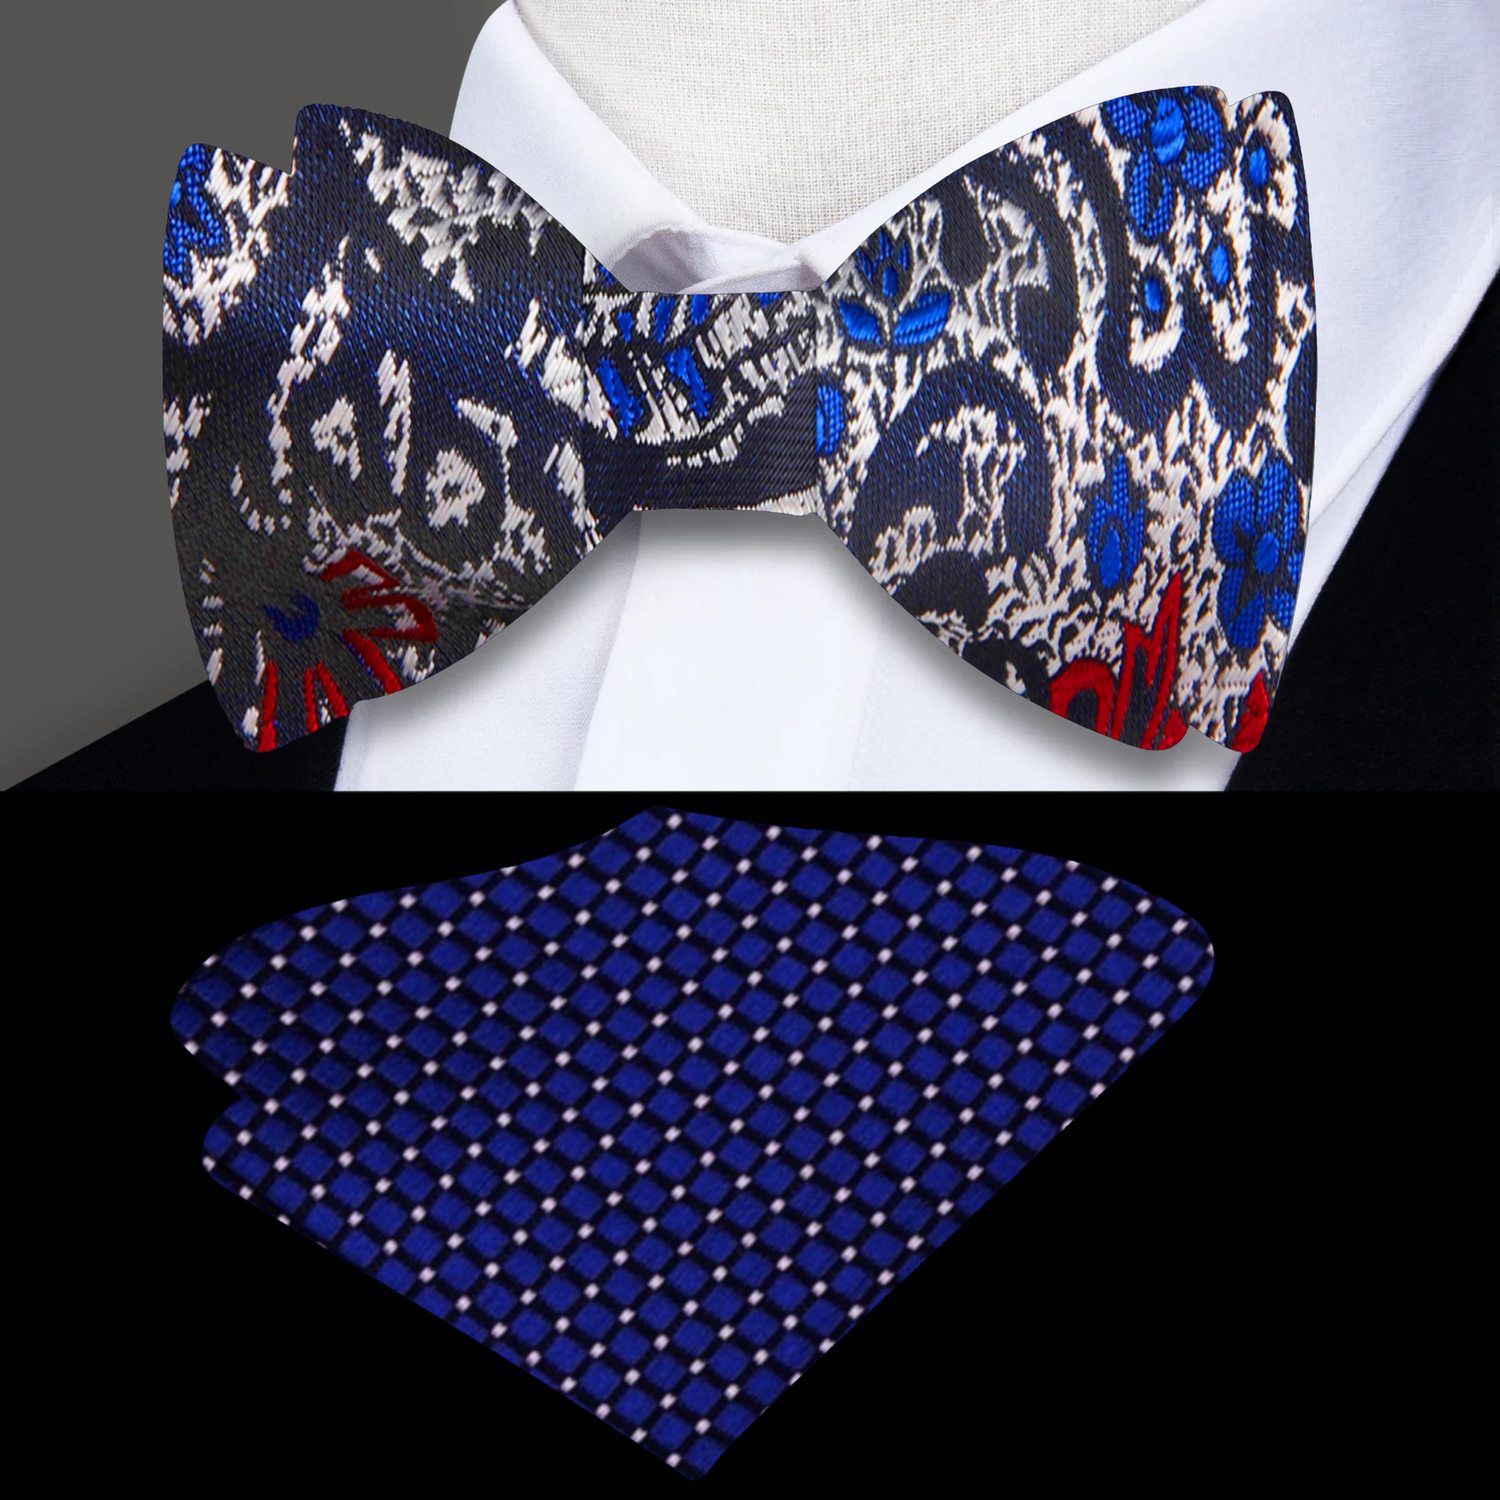 Main: Silver, Blue, Black and Red Paisley Bow Tie and Blue Square 